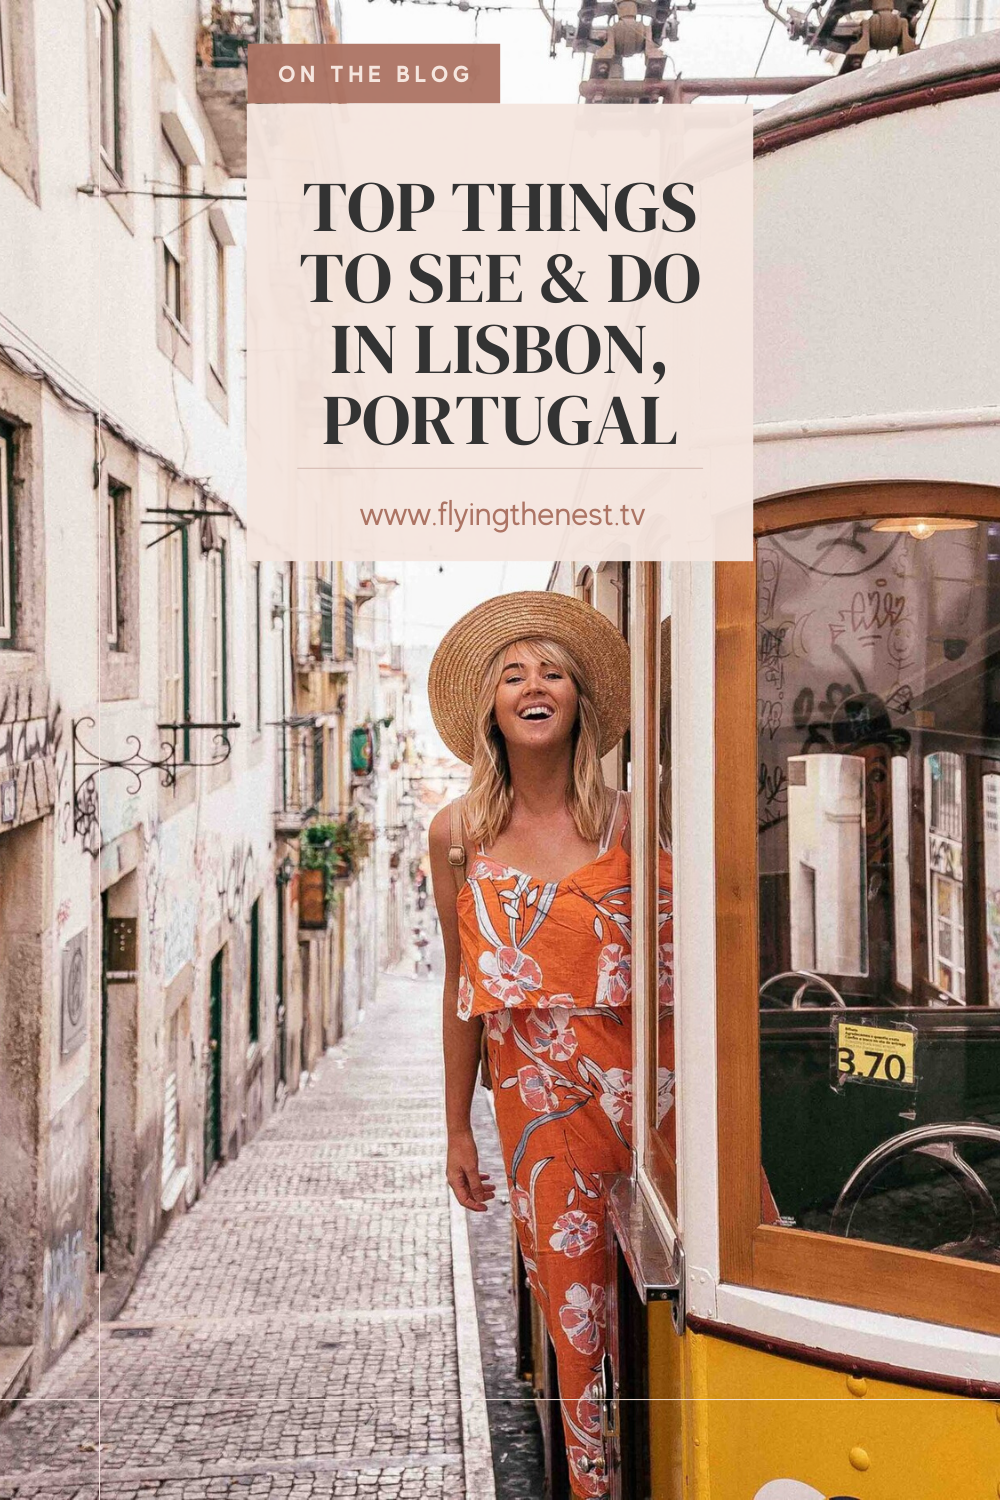 TOP THINGS TO SEE & DO IN LISBON, PORTUGAL.png